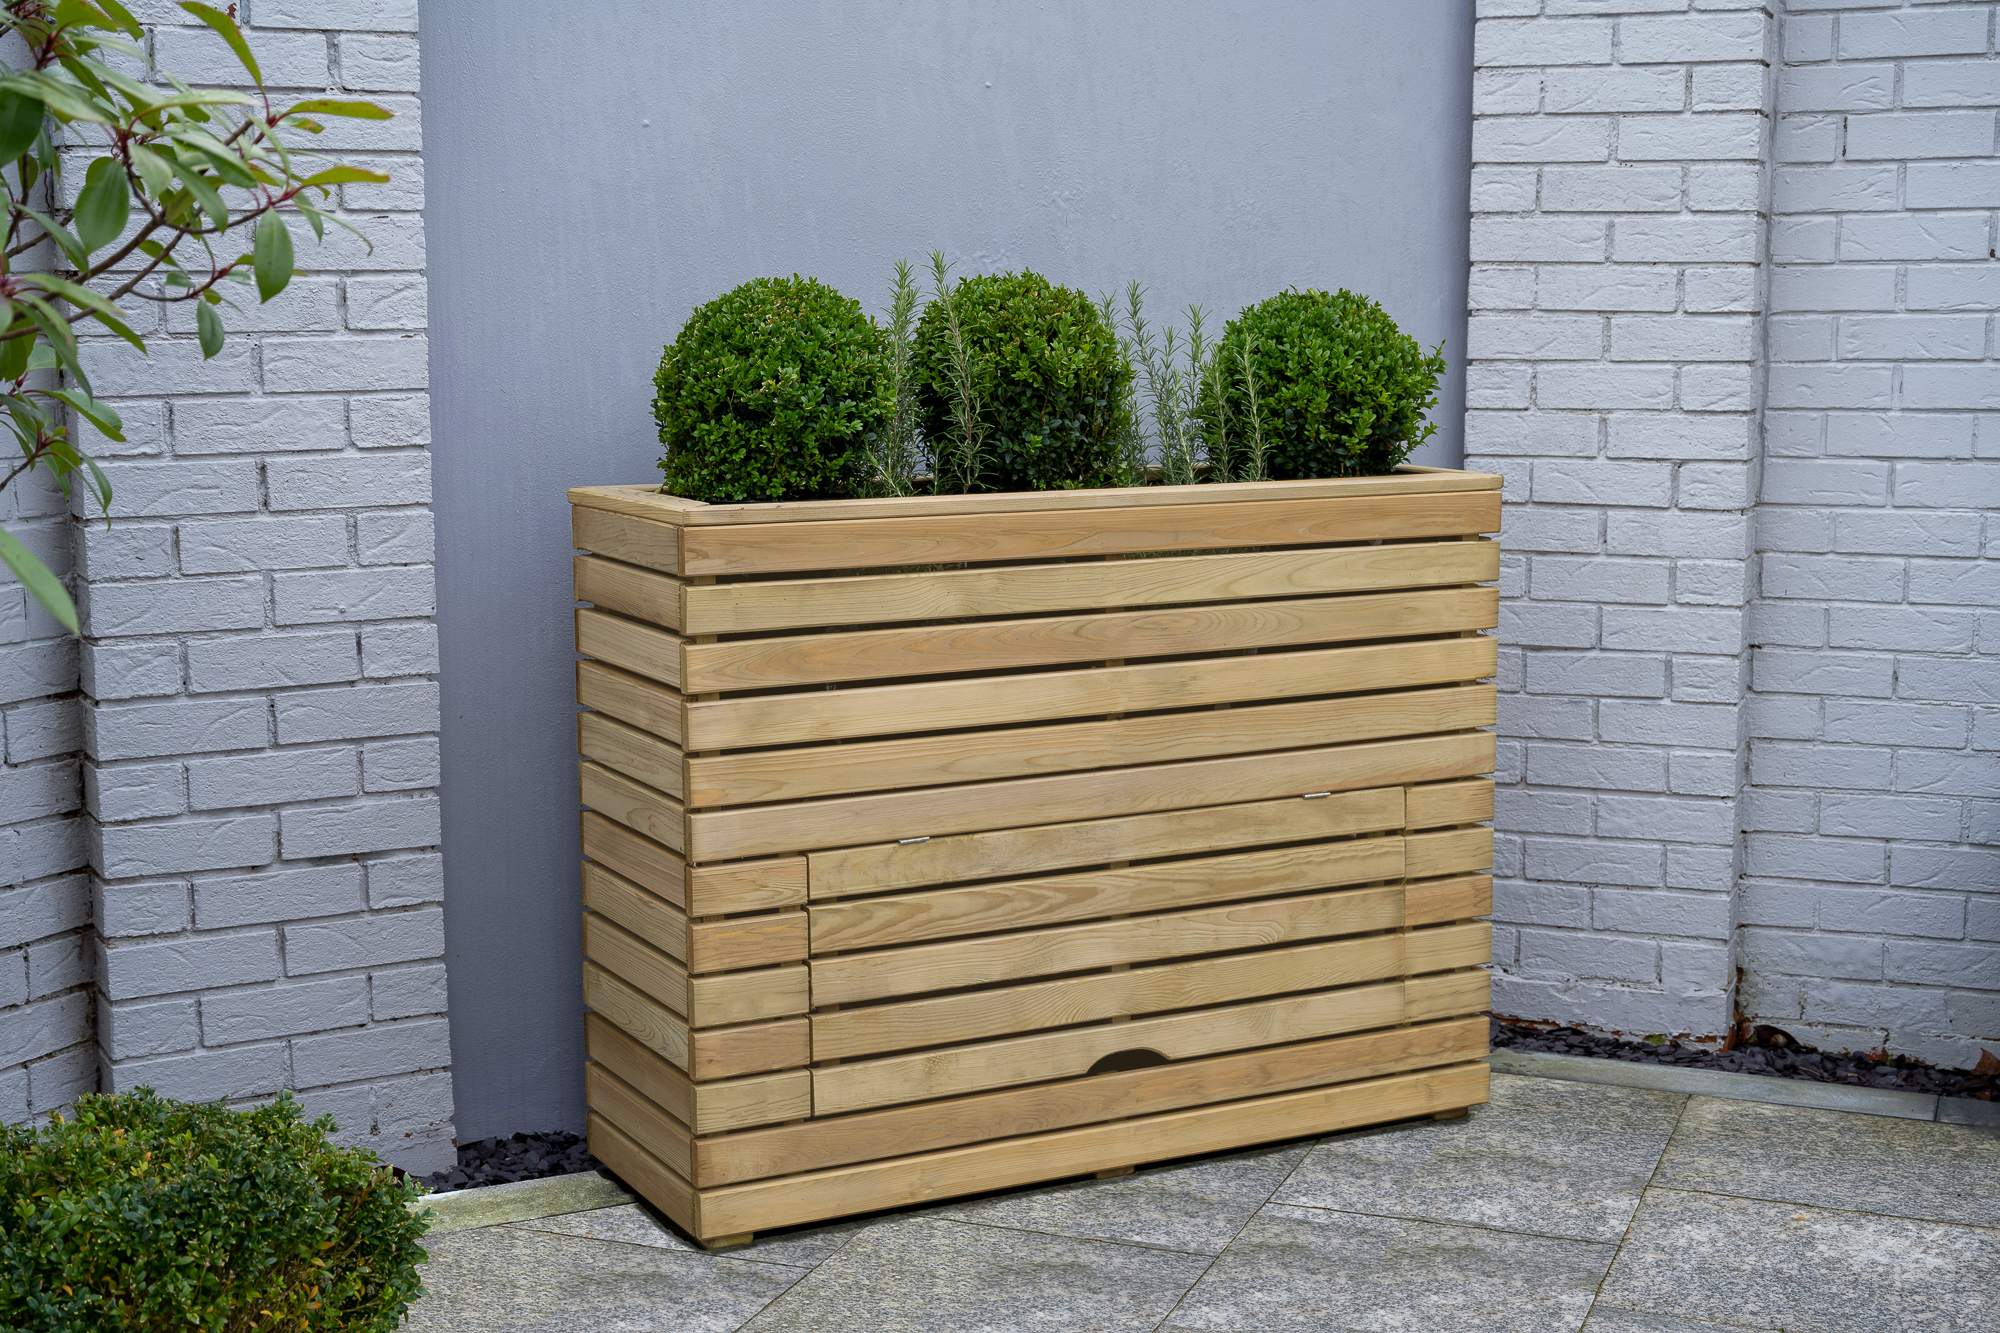 Forest Garden Tall Linear Planter with Storage - 1200 x 400 x 911mm